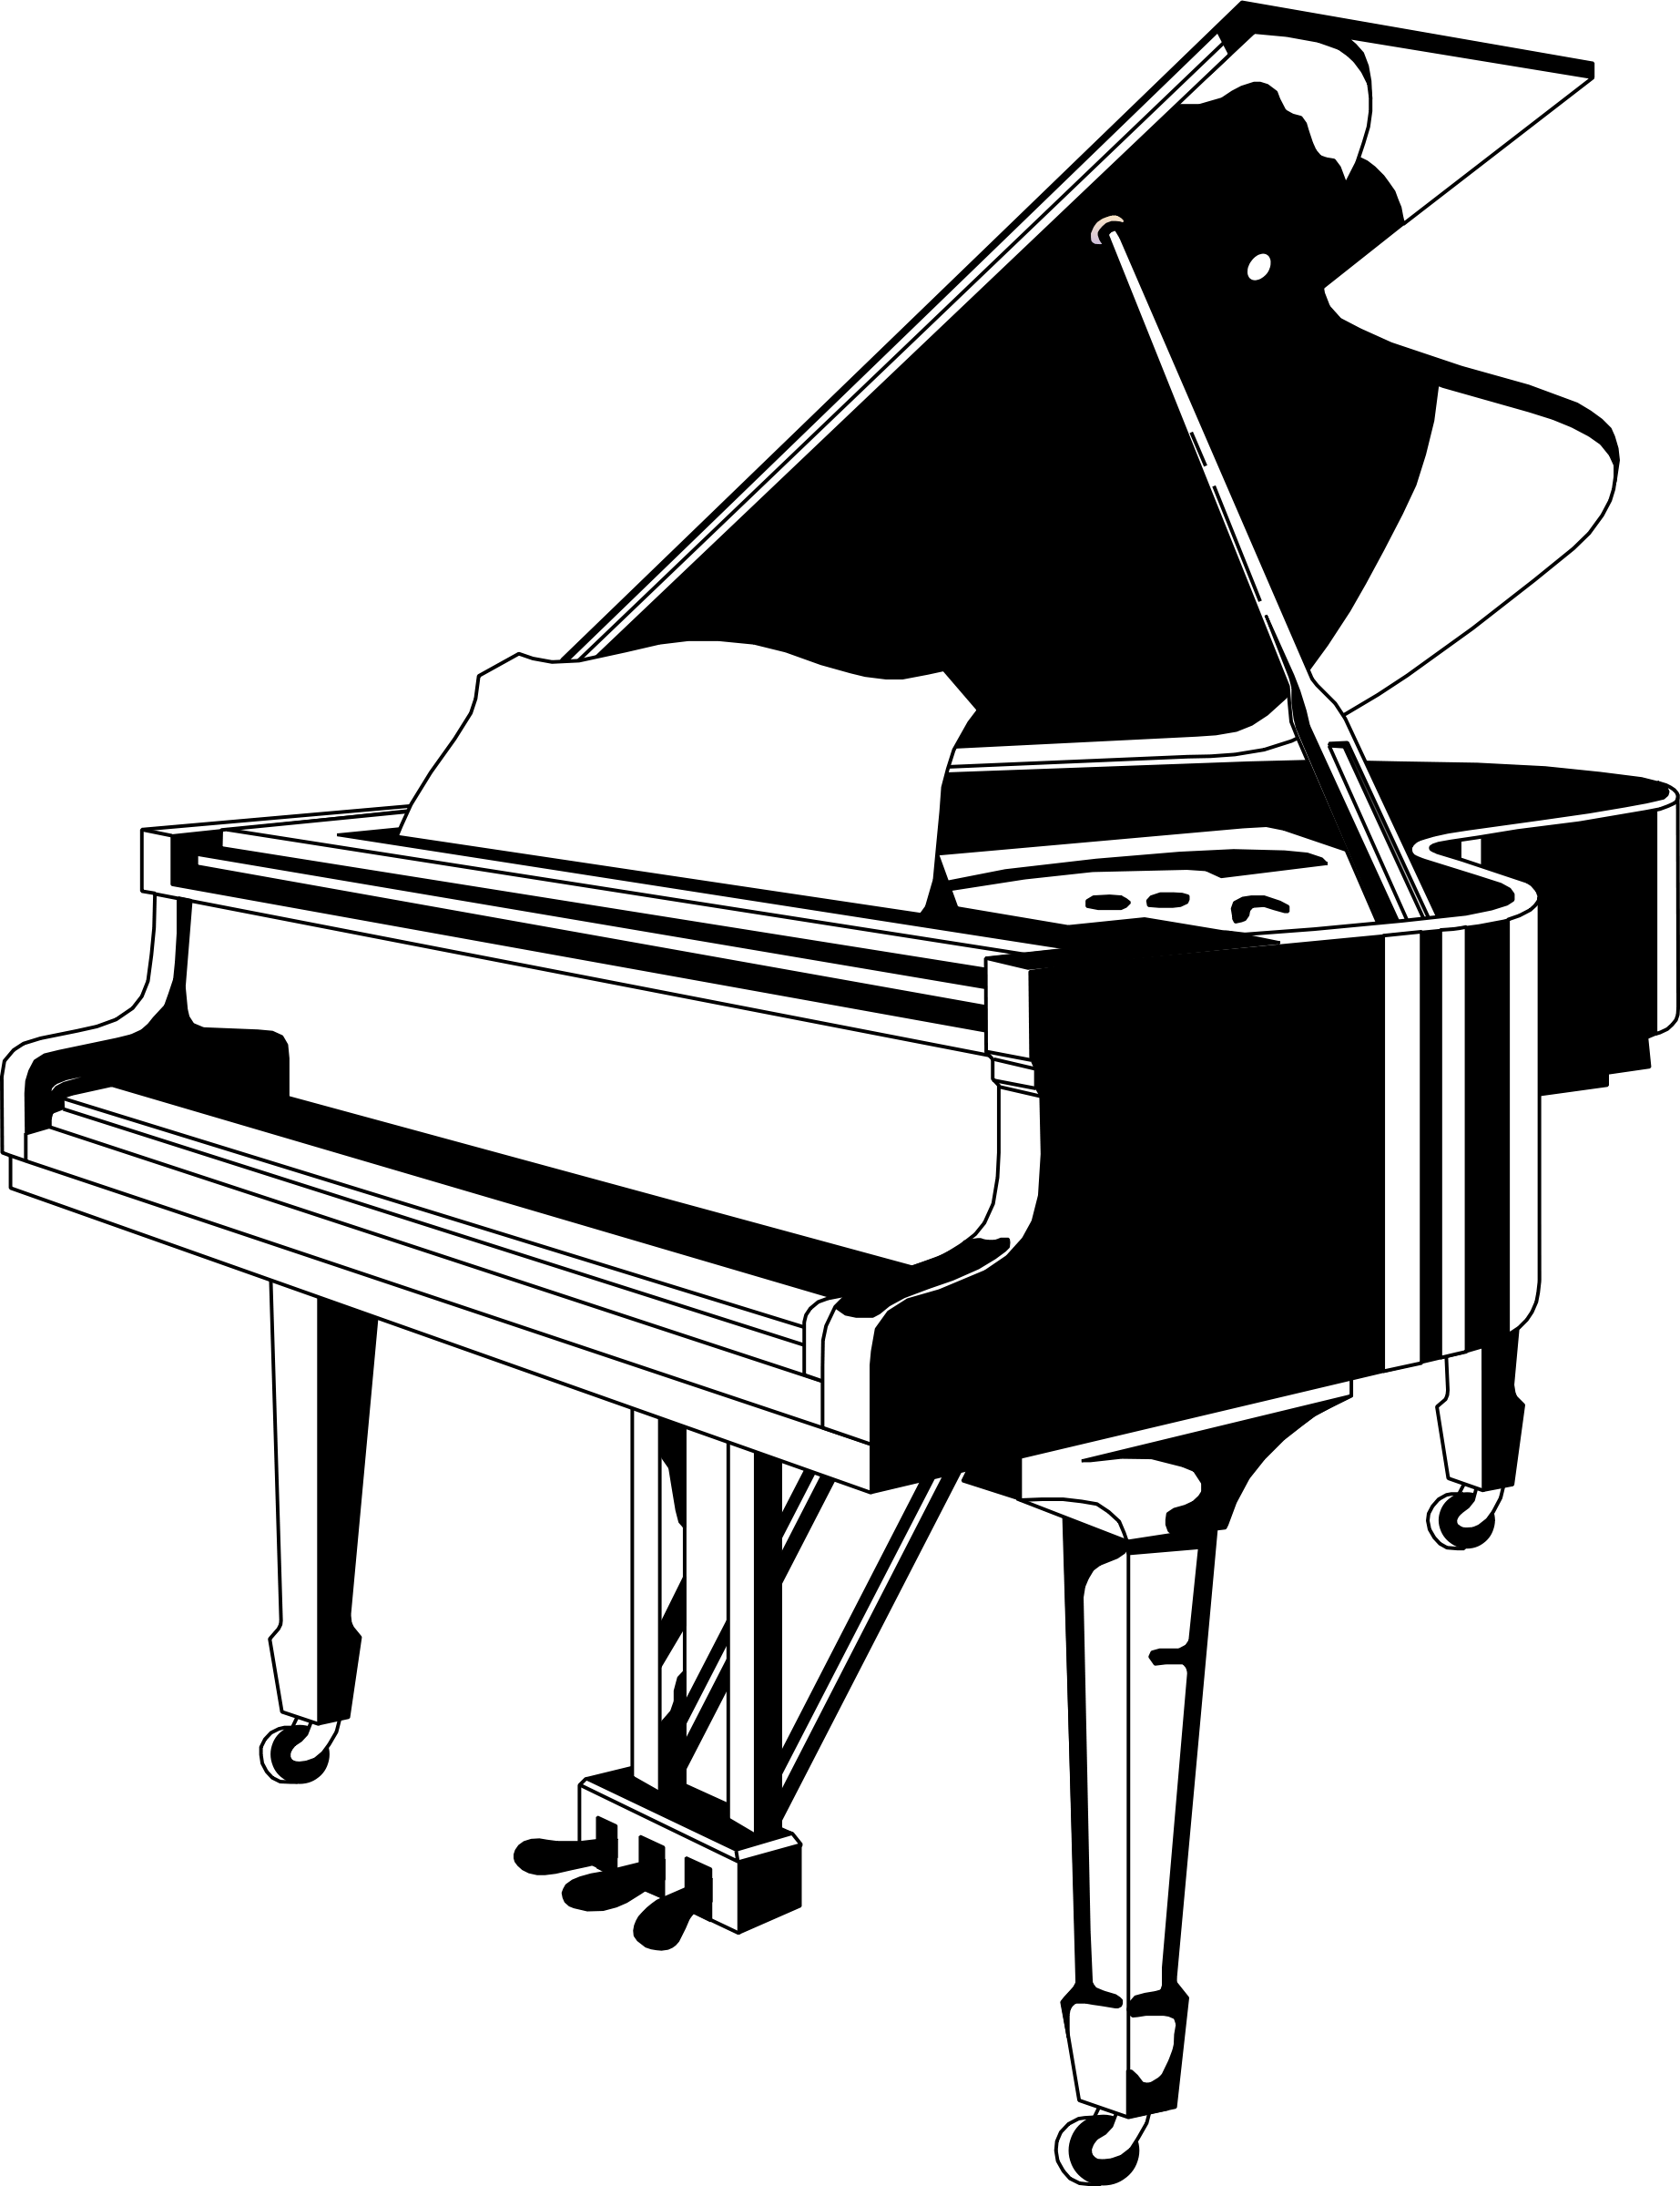 Piano player clipart image #7531